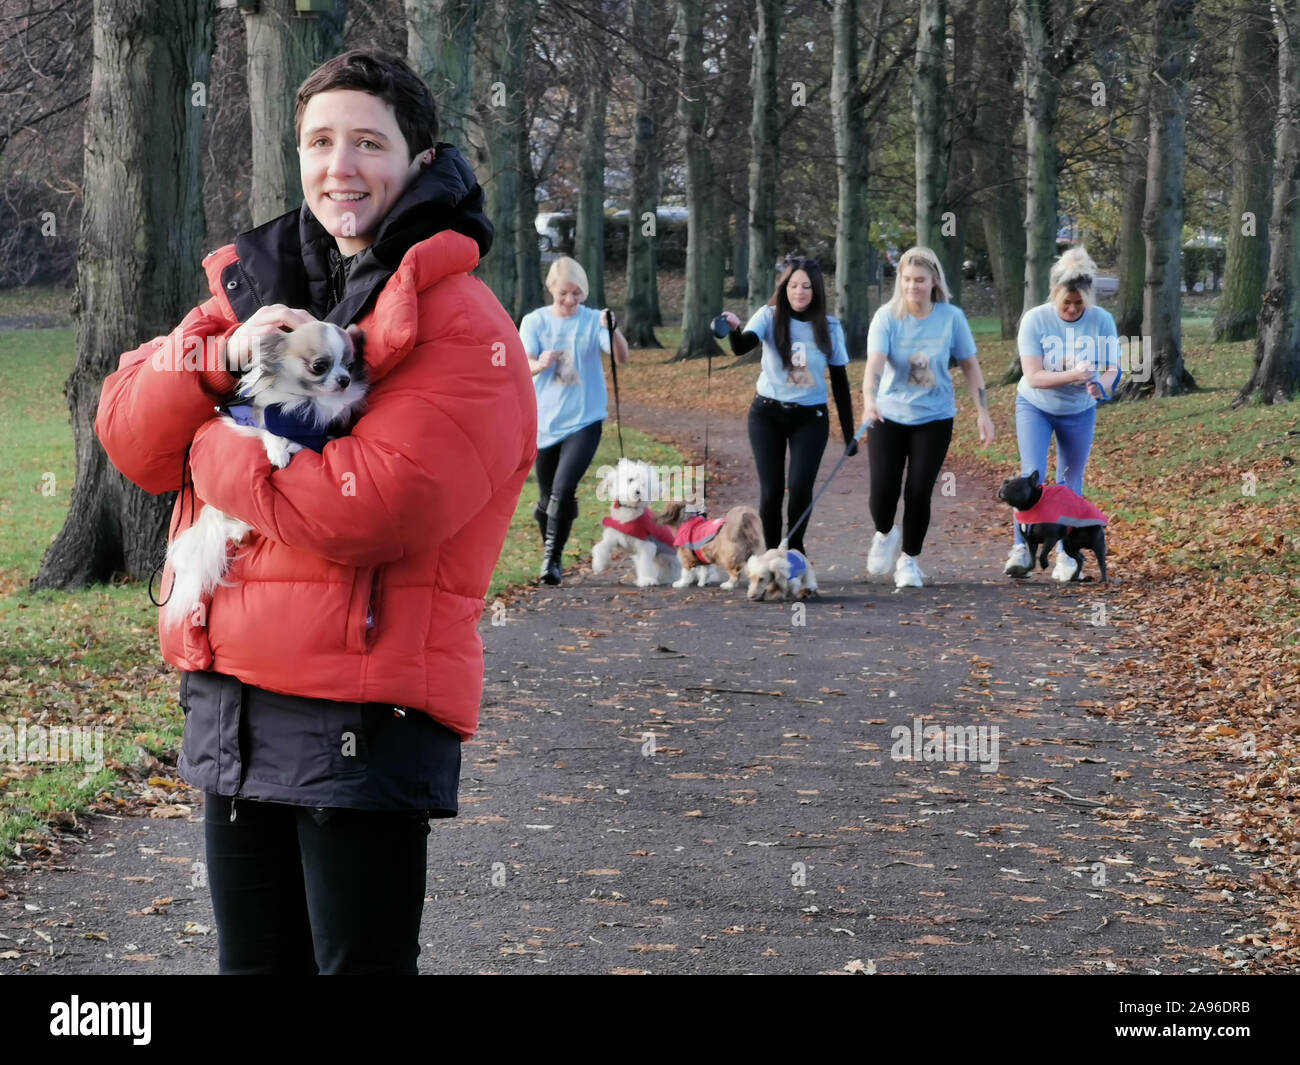 Rural Affairs Minister Mairi Gougeon (left) holds a dog as people from the Buy a Puppy Safely campaign walk dogs through Inverleith Park in Edinburgh. The campaign warning of the dangers of buying puppies from illegal dog breeders and puppy farms is urging people to 'look beyond cute' to avoid misery this Christmas. Stock Photo